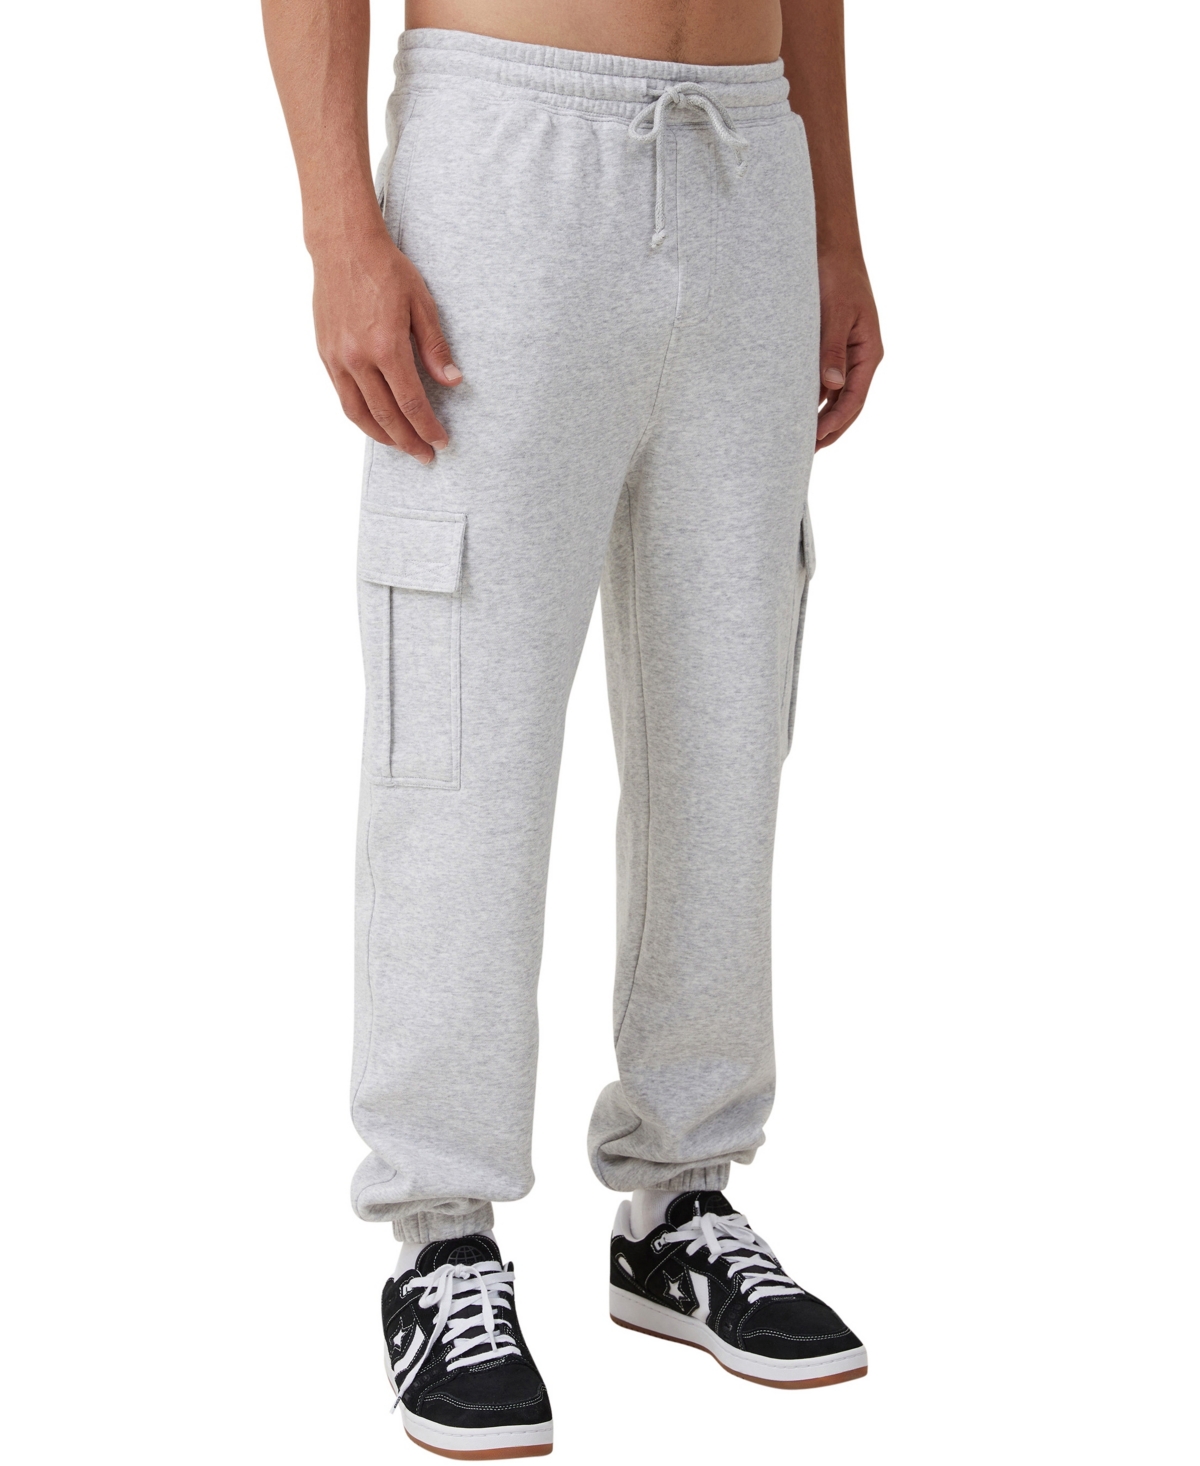 COTTON ON MEN'S CARGO LOOSE FIT TRACK PANTS